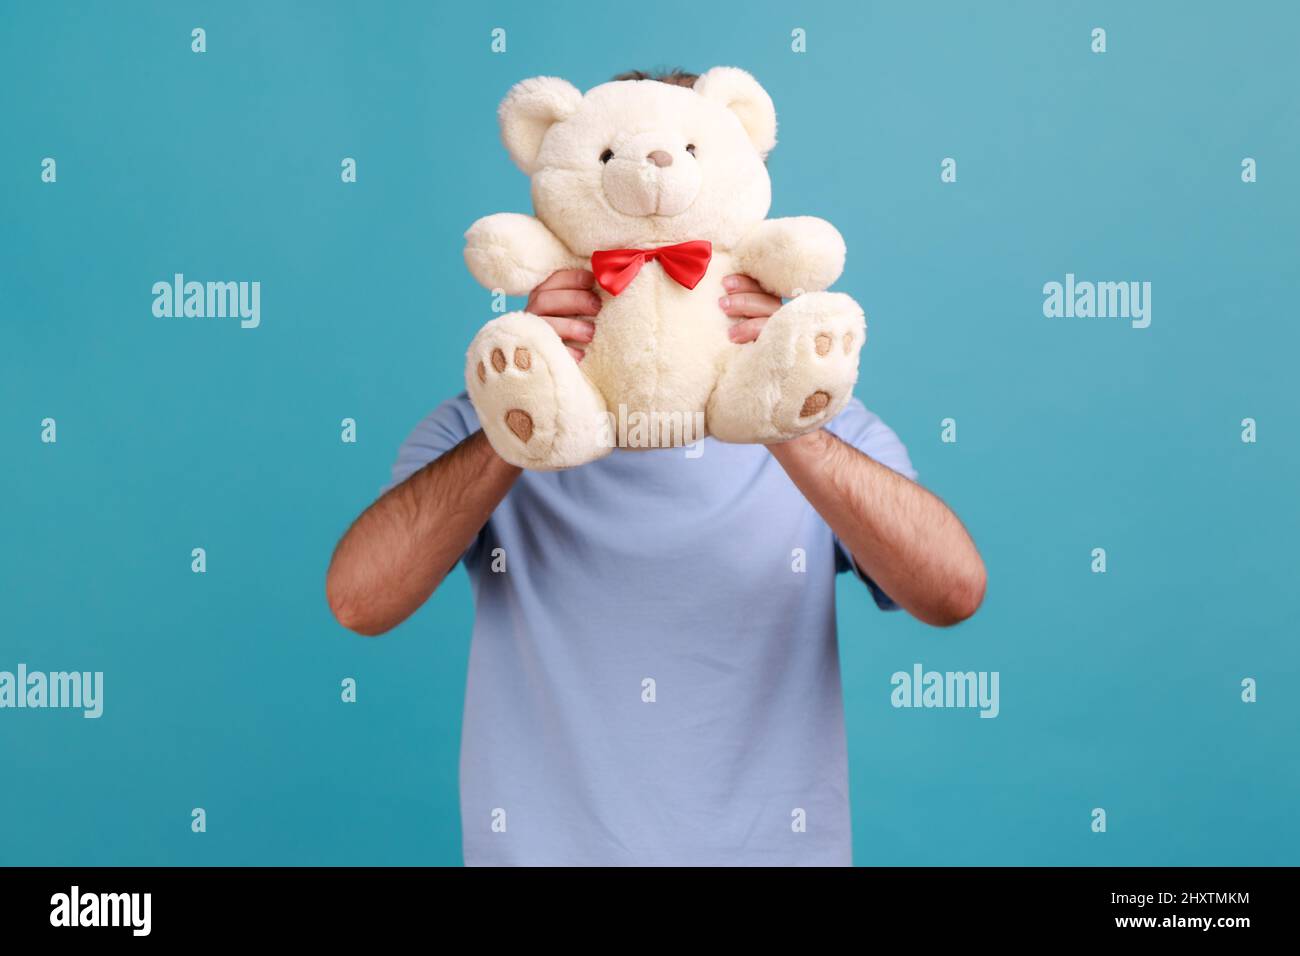 Portrait of unknown anonymous bearded man hiding his face behind white soft teddy bear, romantic surprise for his girflriend. Indoor studio shot isolated on blue background. Stock Photo